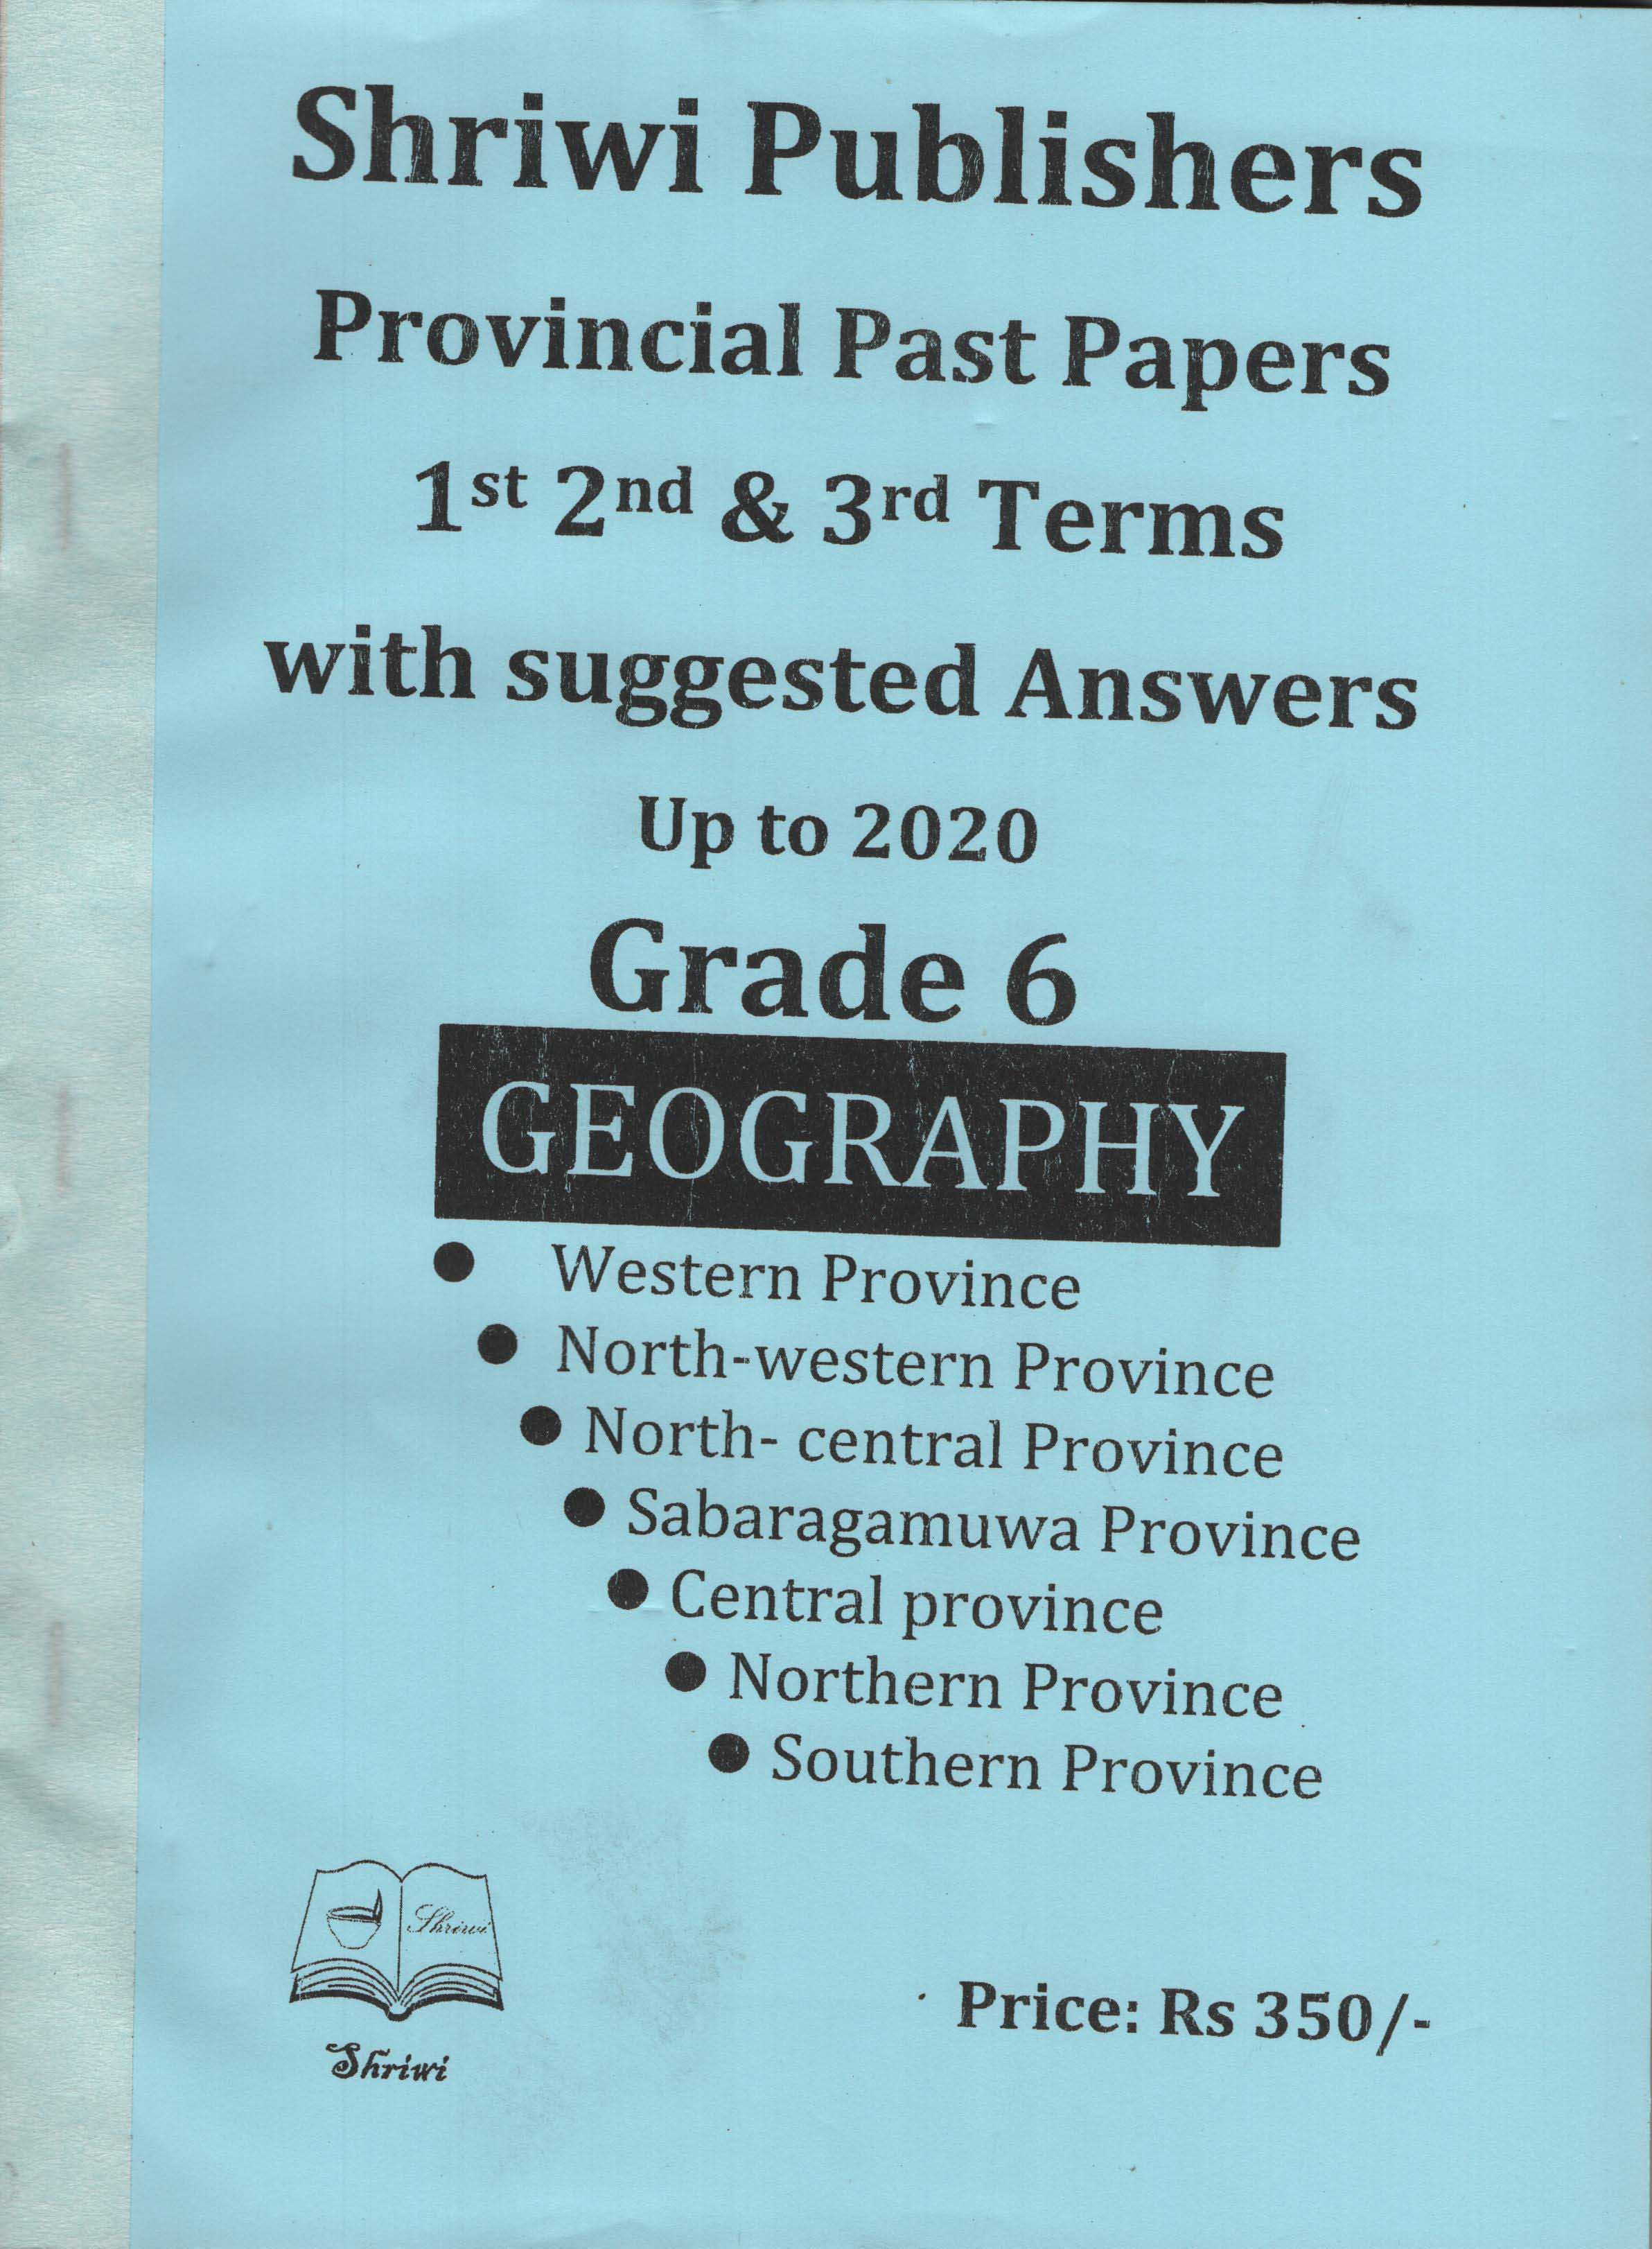 Shriwi Grade 6 Geography Provincial Past Papers 1st 2nd & 3rd Terms with Suggested Answers up to 2021